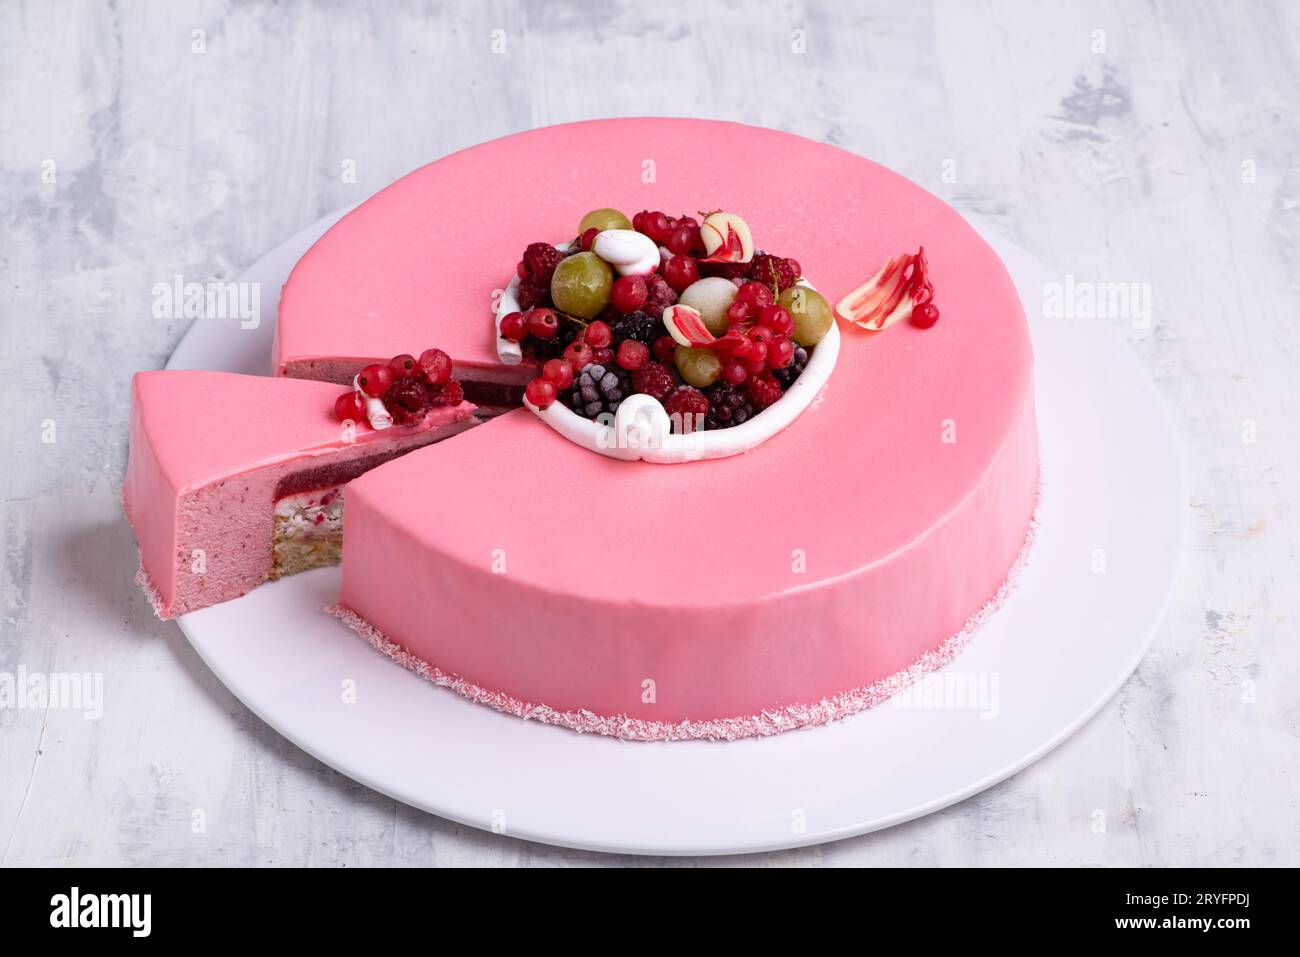 Angle shot of one piece cut from a beautiful berry mouse cake. Stock Photo